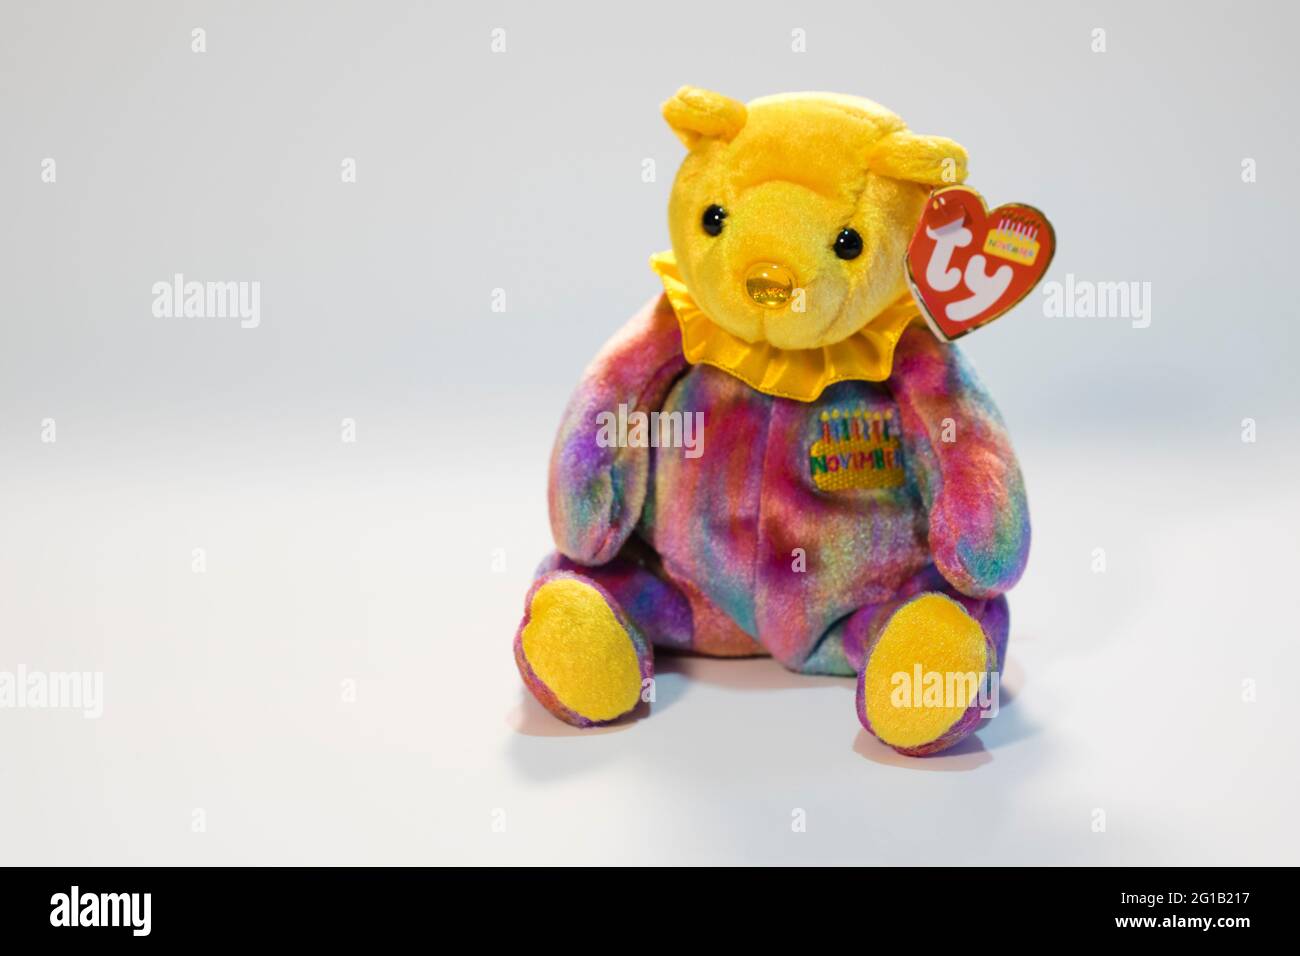 Photo of Beanie Babie named Topaz. From the Beanie Babie November birthday collection. Stock Photo